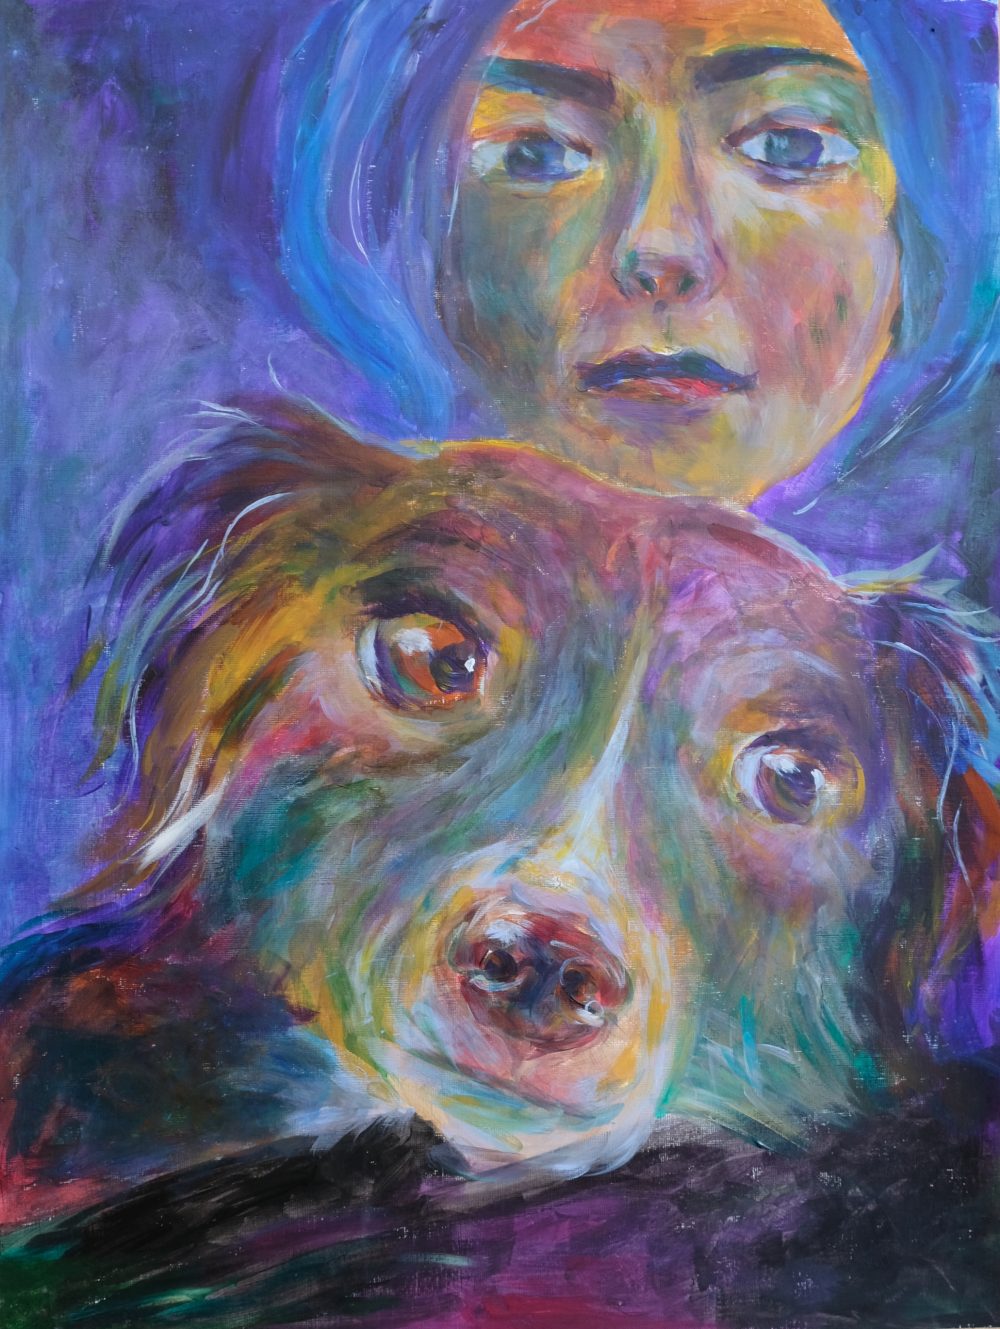 Colorful painting of dog in the foreground and human in the background.